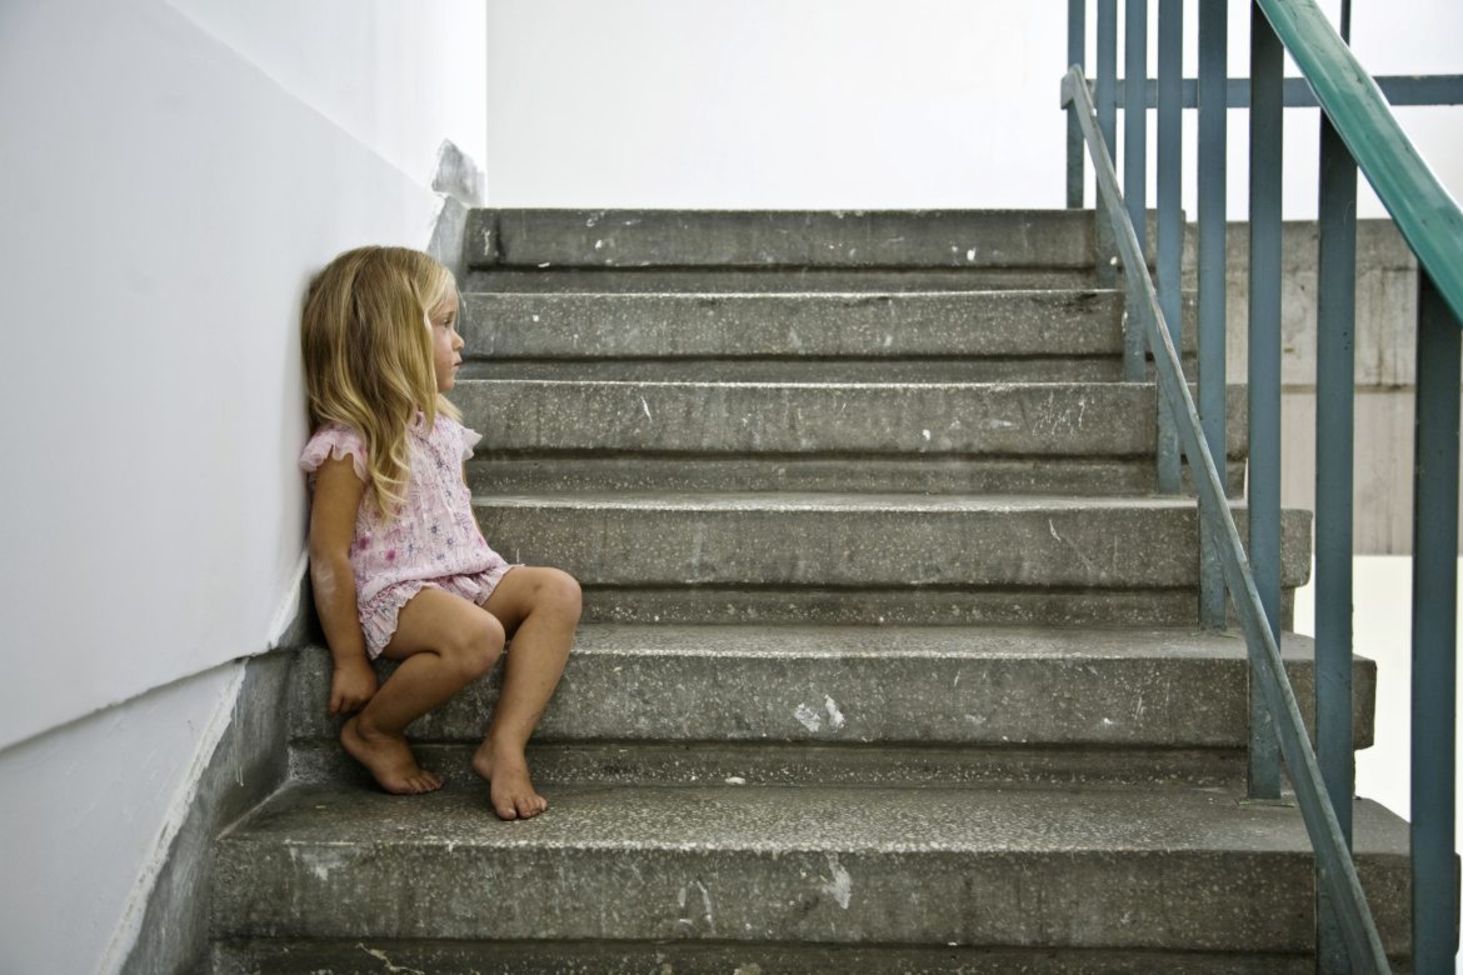 Charities in Northern Ireland have called on the Executive to renew efforts to tackle child poverty by committing to investment and targeted reductions as part of the upcoming Anti-Poverty Strategy 